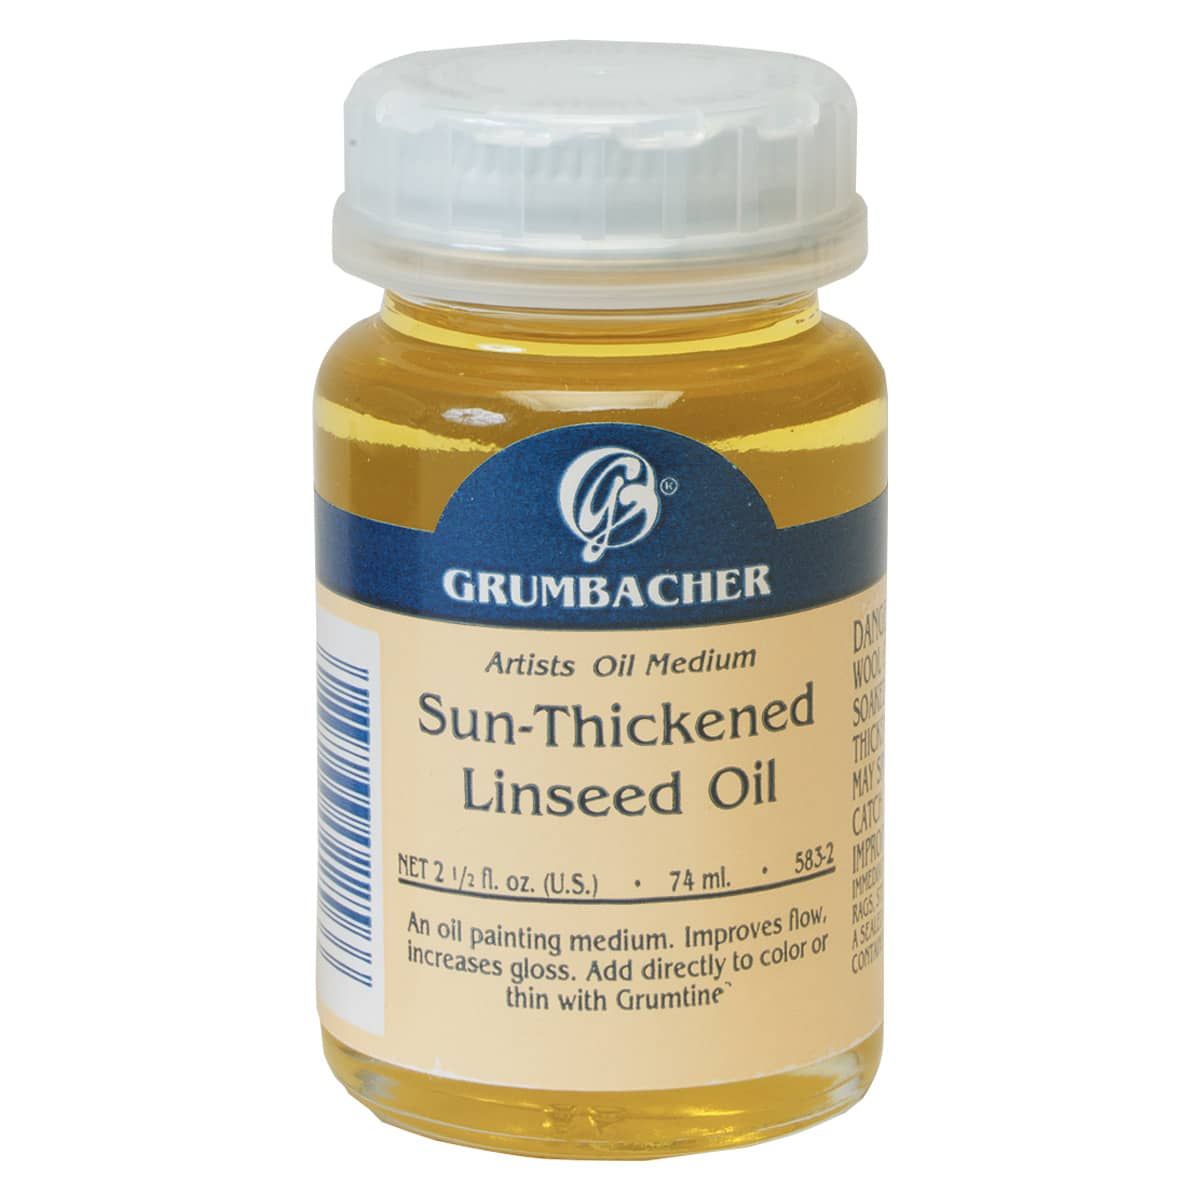 Grumbacher Pre-Tested Sun-Thickened Linseed Oil, 2.5 oz Bottle